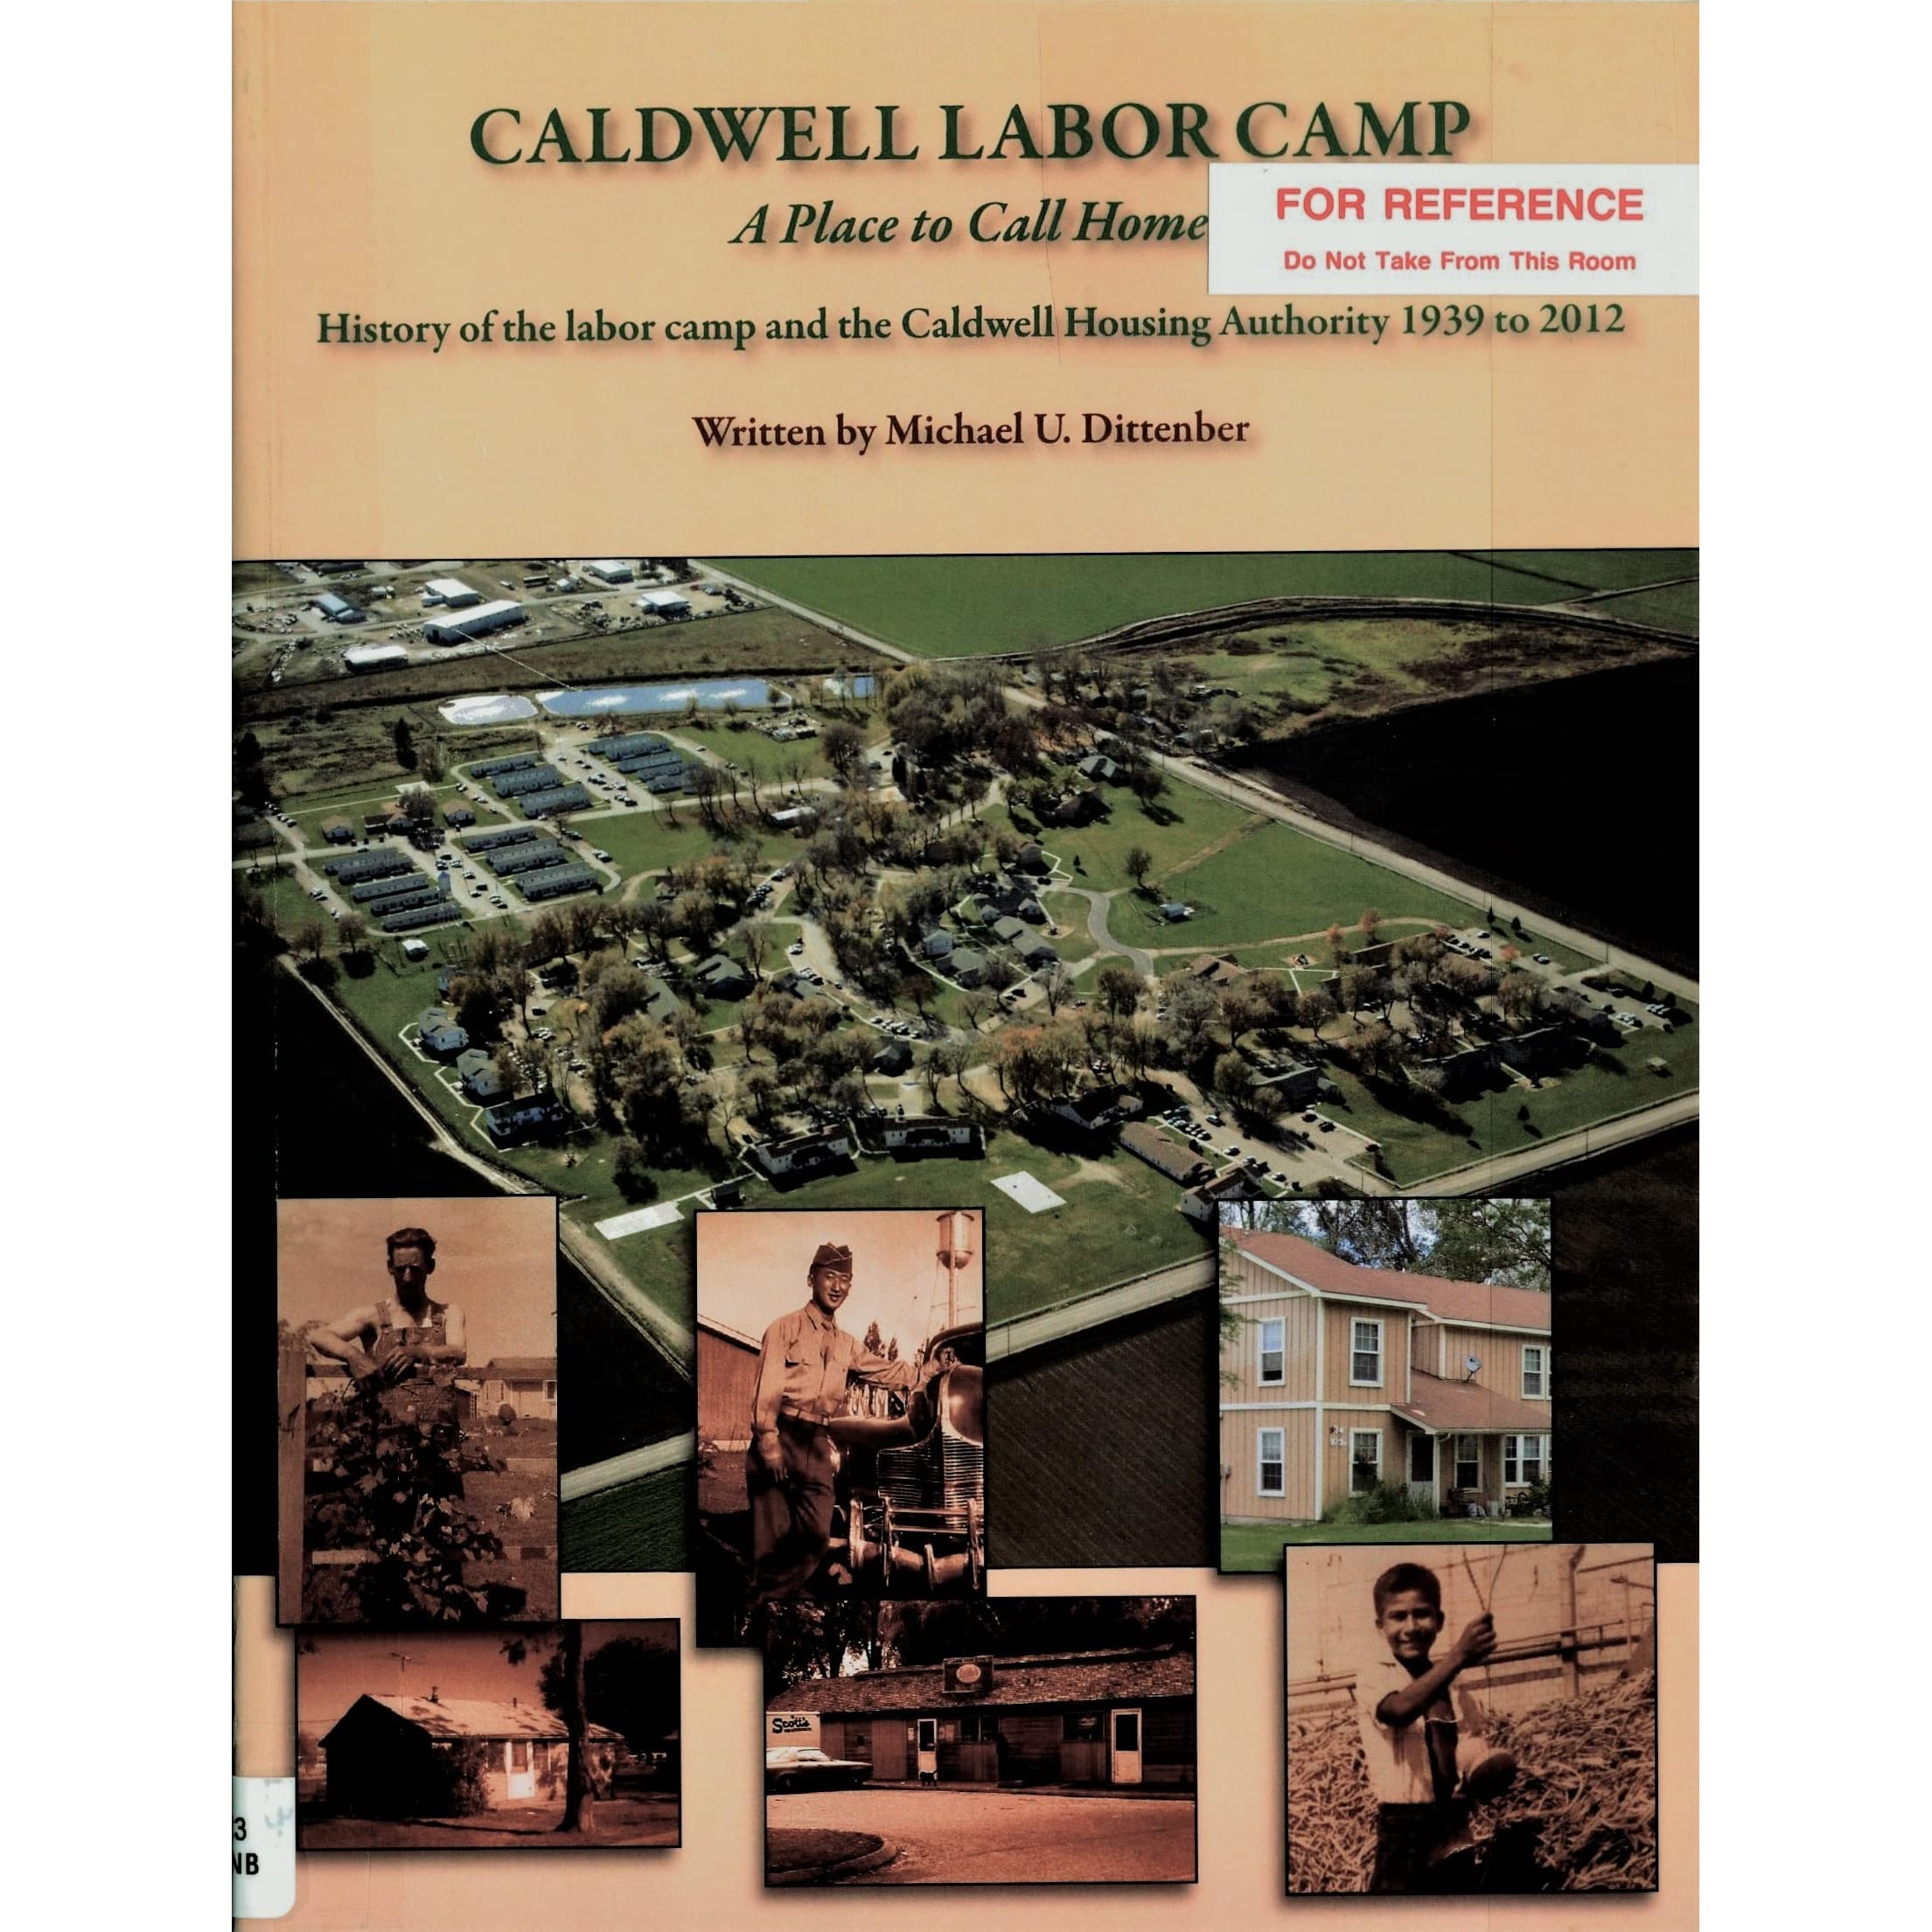 Caldwell Labor Camp: A place to call home (book cover)